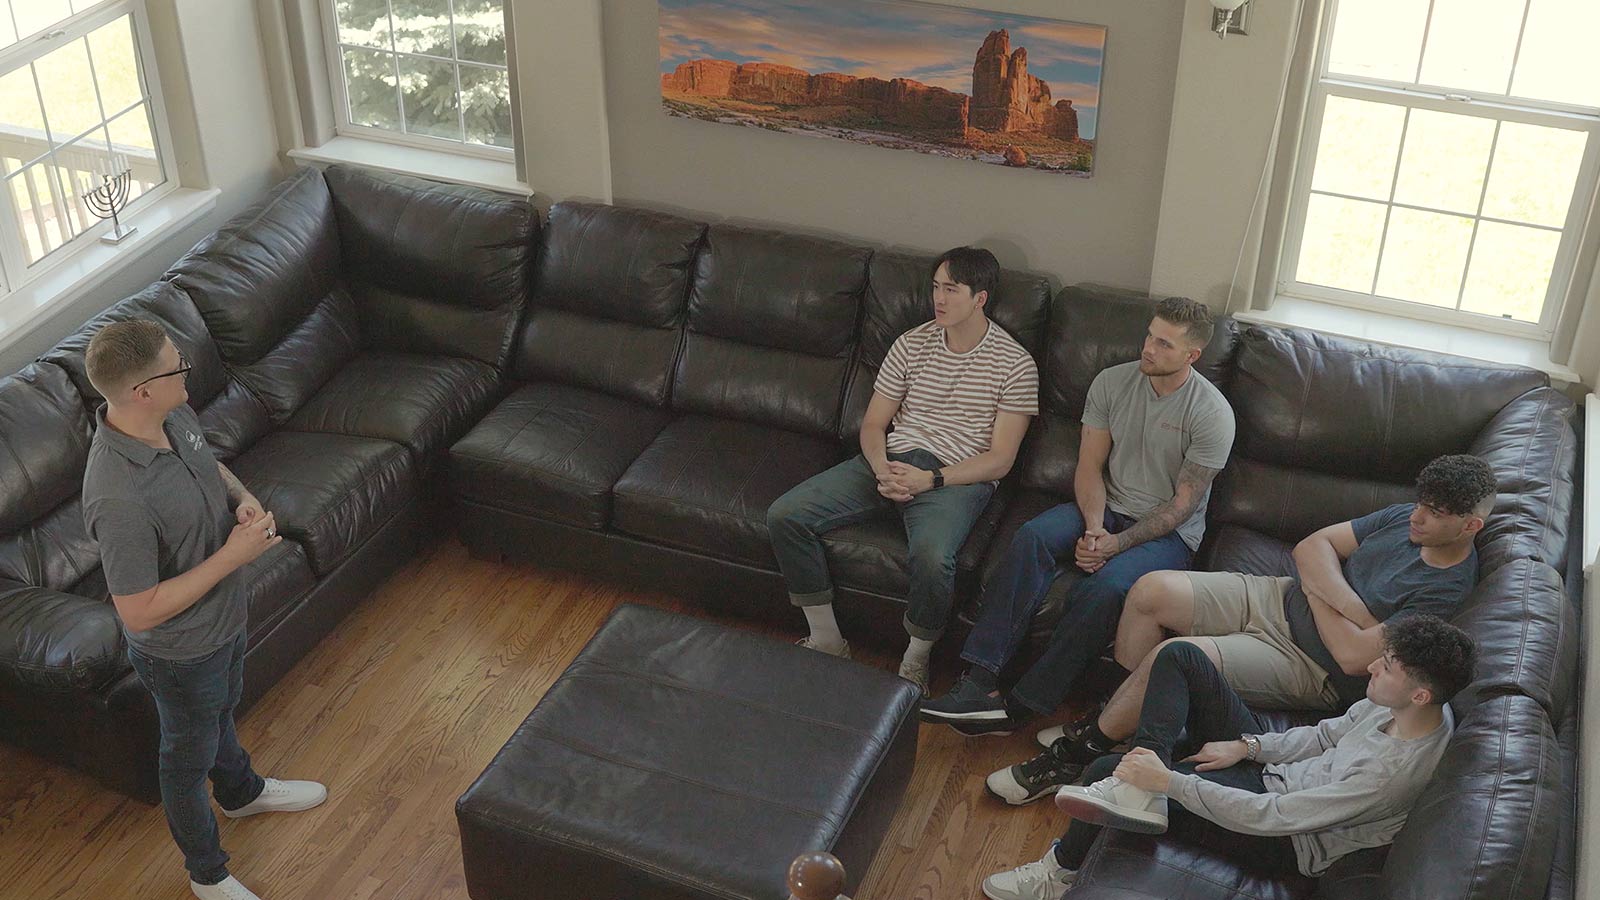 Four men listening to another man speaking in a living room with a large sectional sofa.